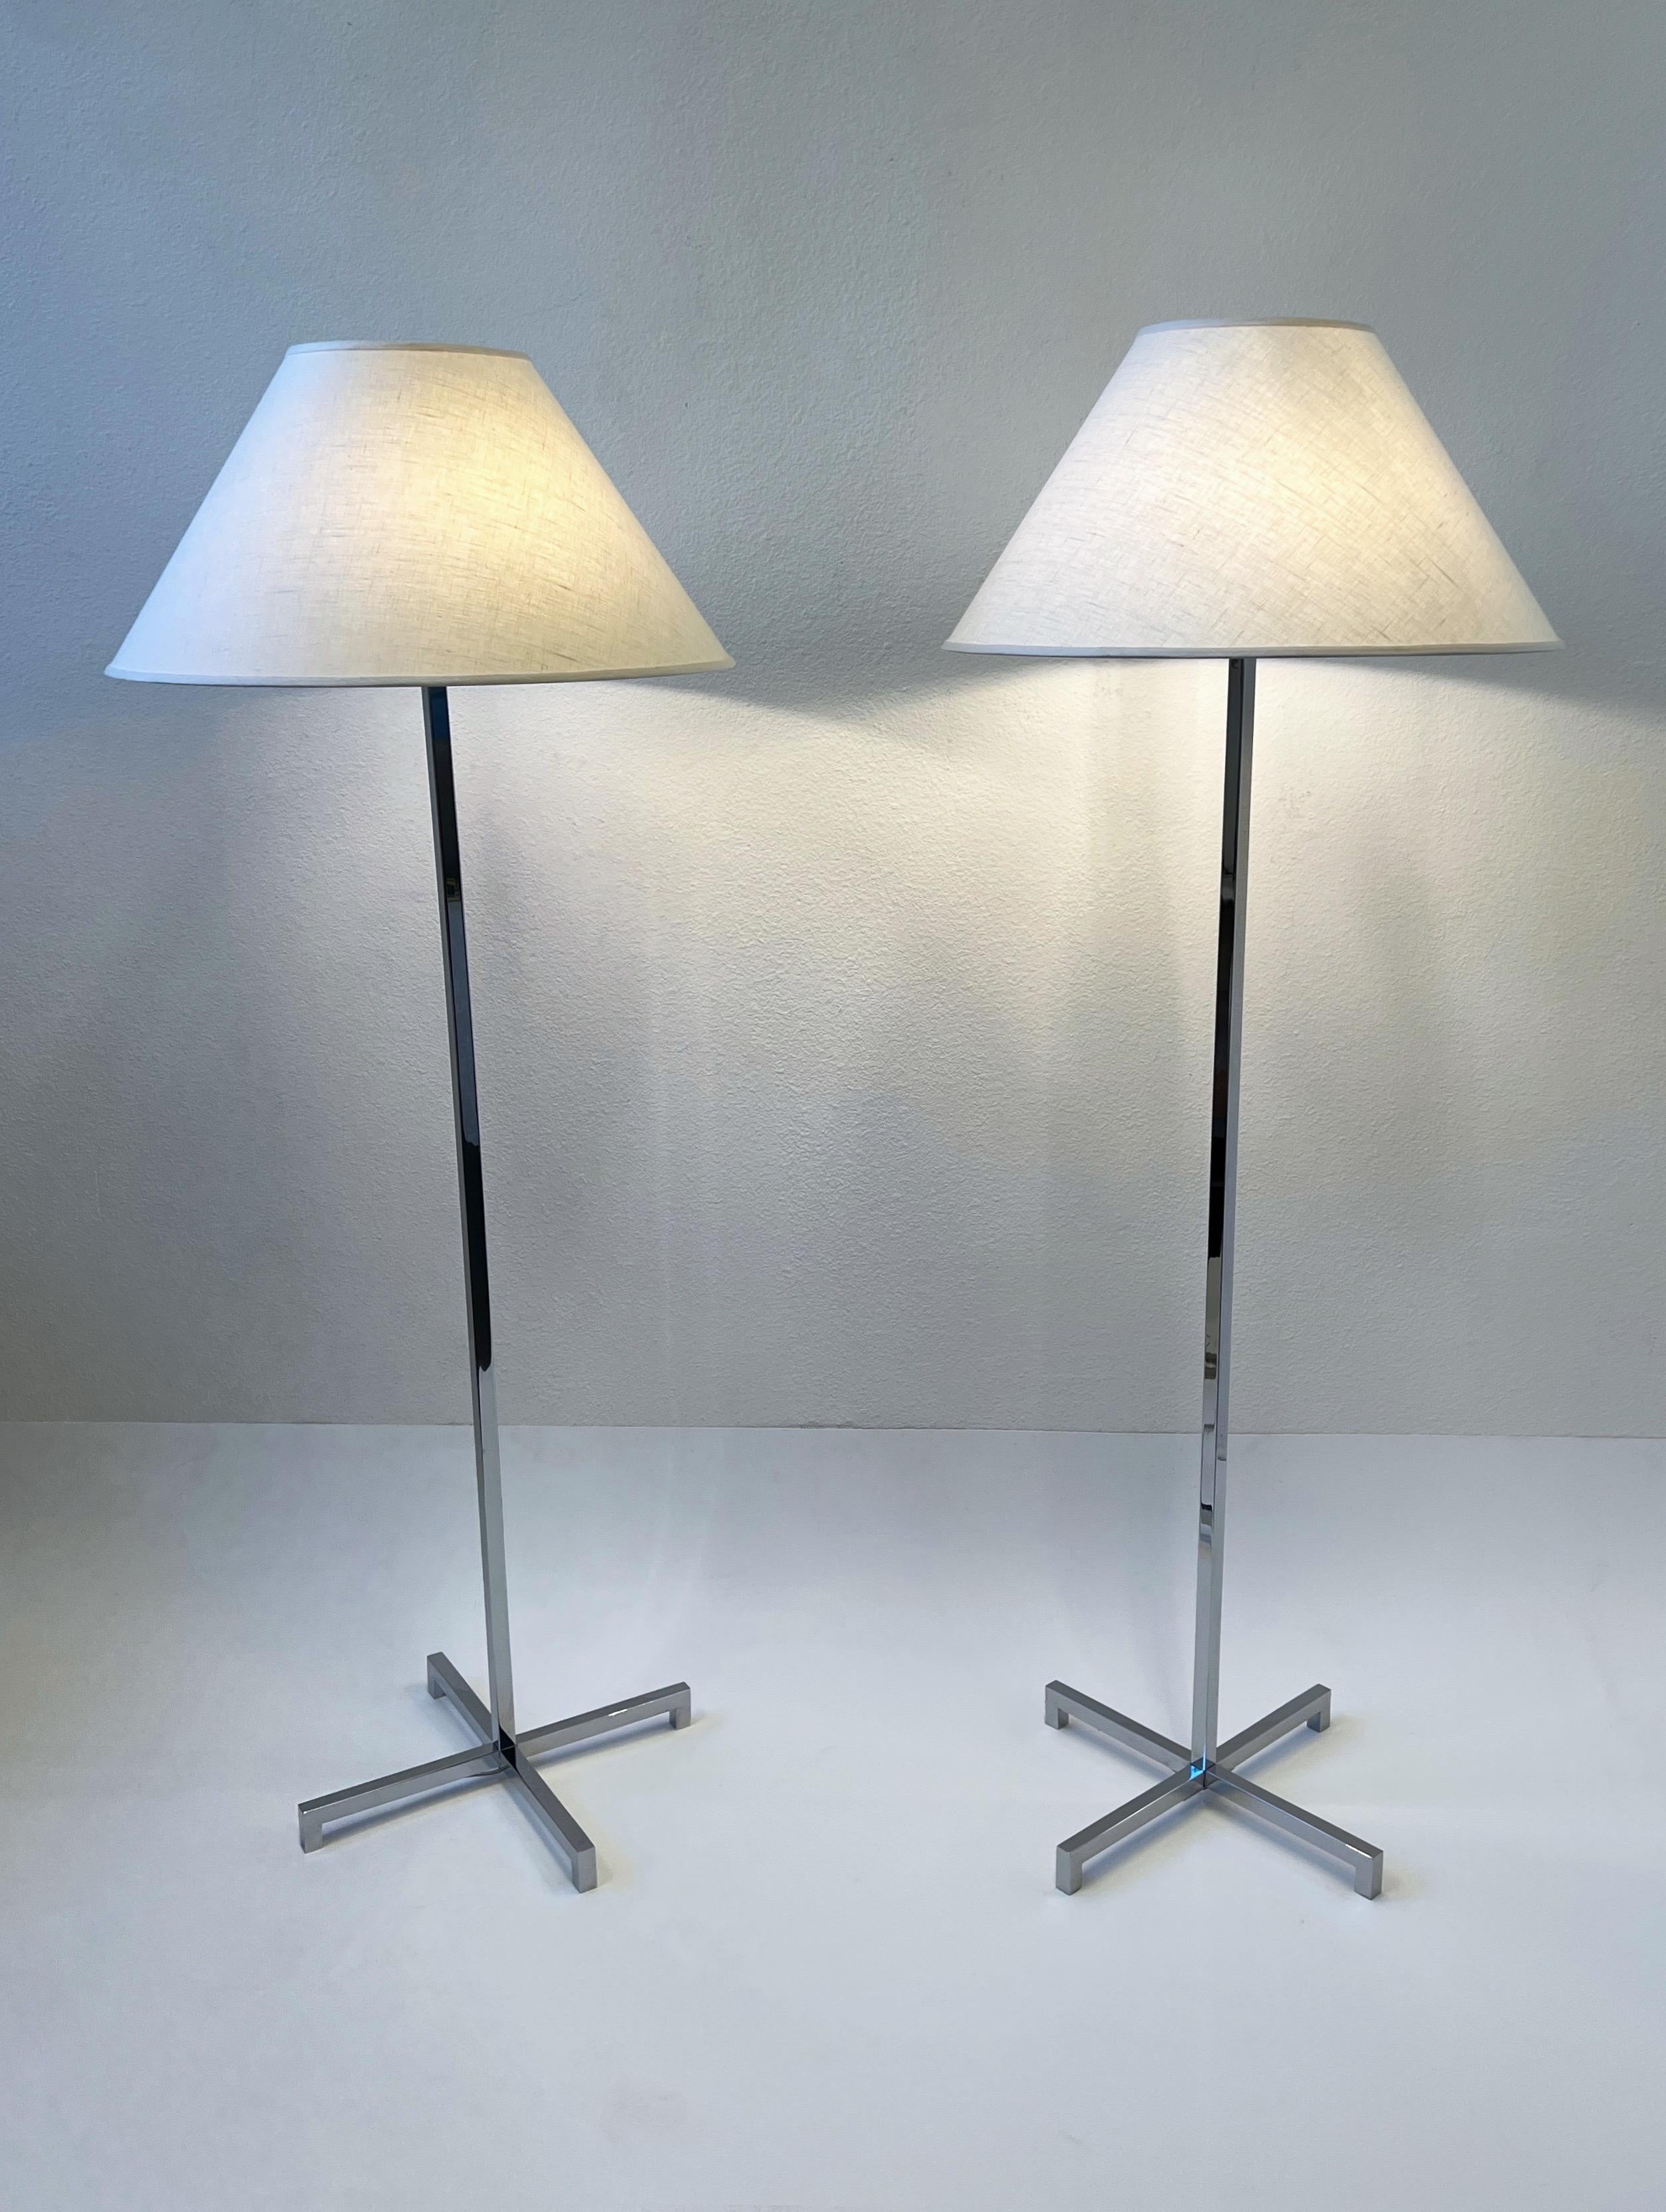 Glamorous pair of polish chrome floor lamps by renowned American designer T.H. Robsjohn Gibbings for Hansen Lighting Co.
Newly rewired and new vanilla linen shades. 
In beautiful vintage condition. 
Each lamp takes three 75w max Edison light bulbs.